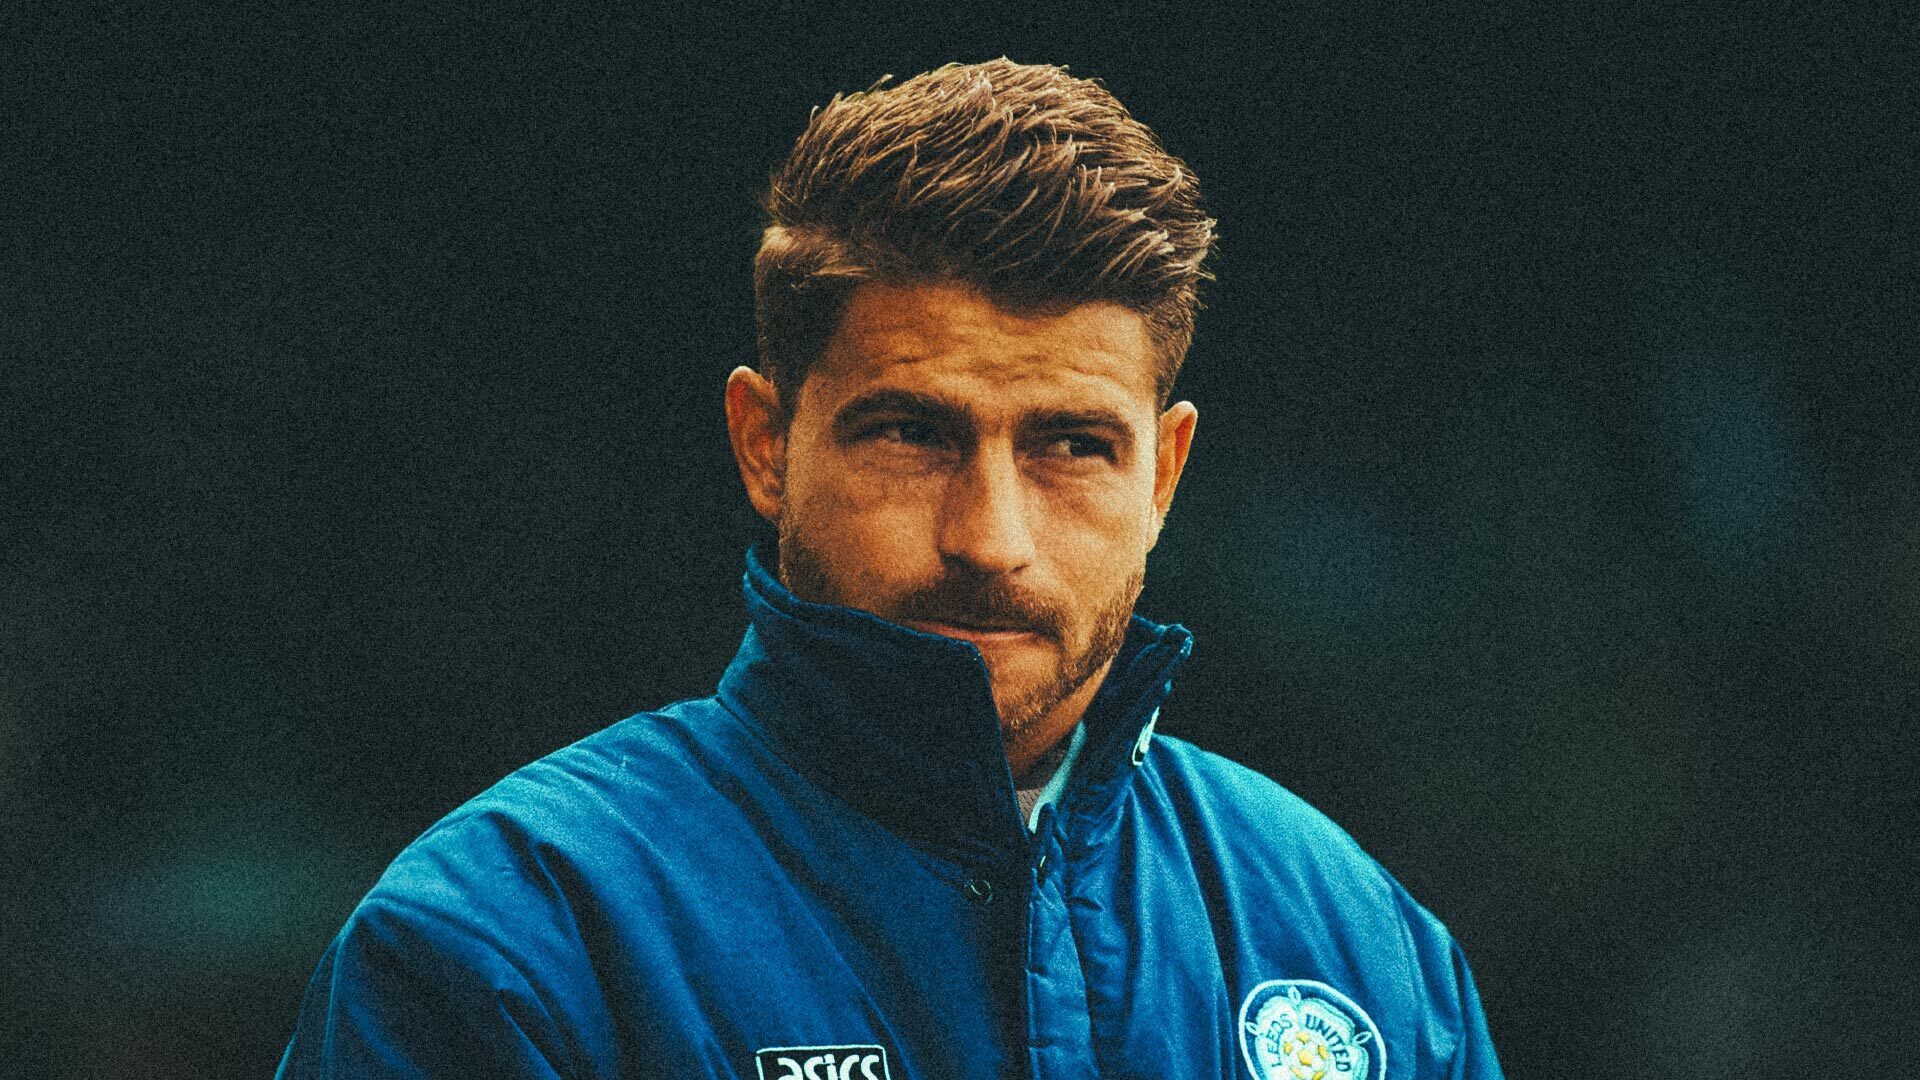 Gaetano Berardi looking, quite frankly, fucking ridiculously handsome, photoshopped in an old school LUFC coach's jacket